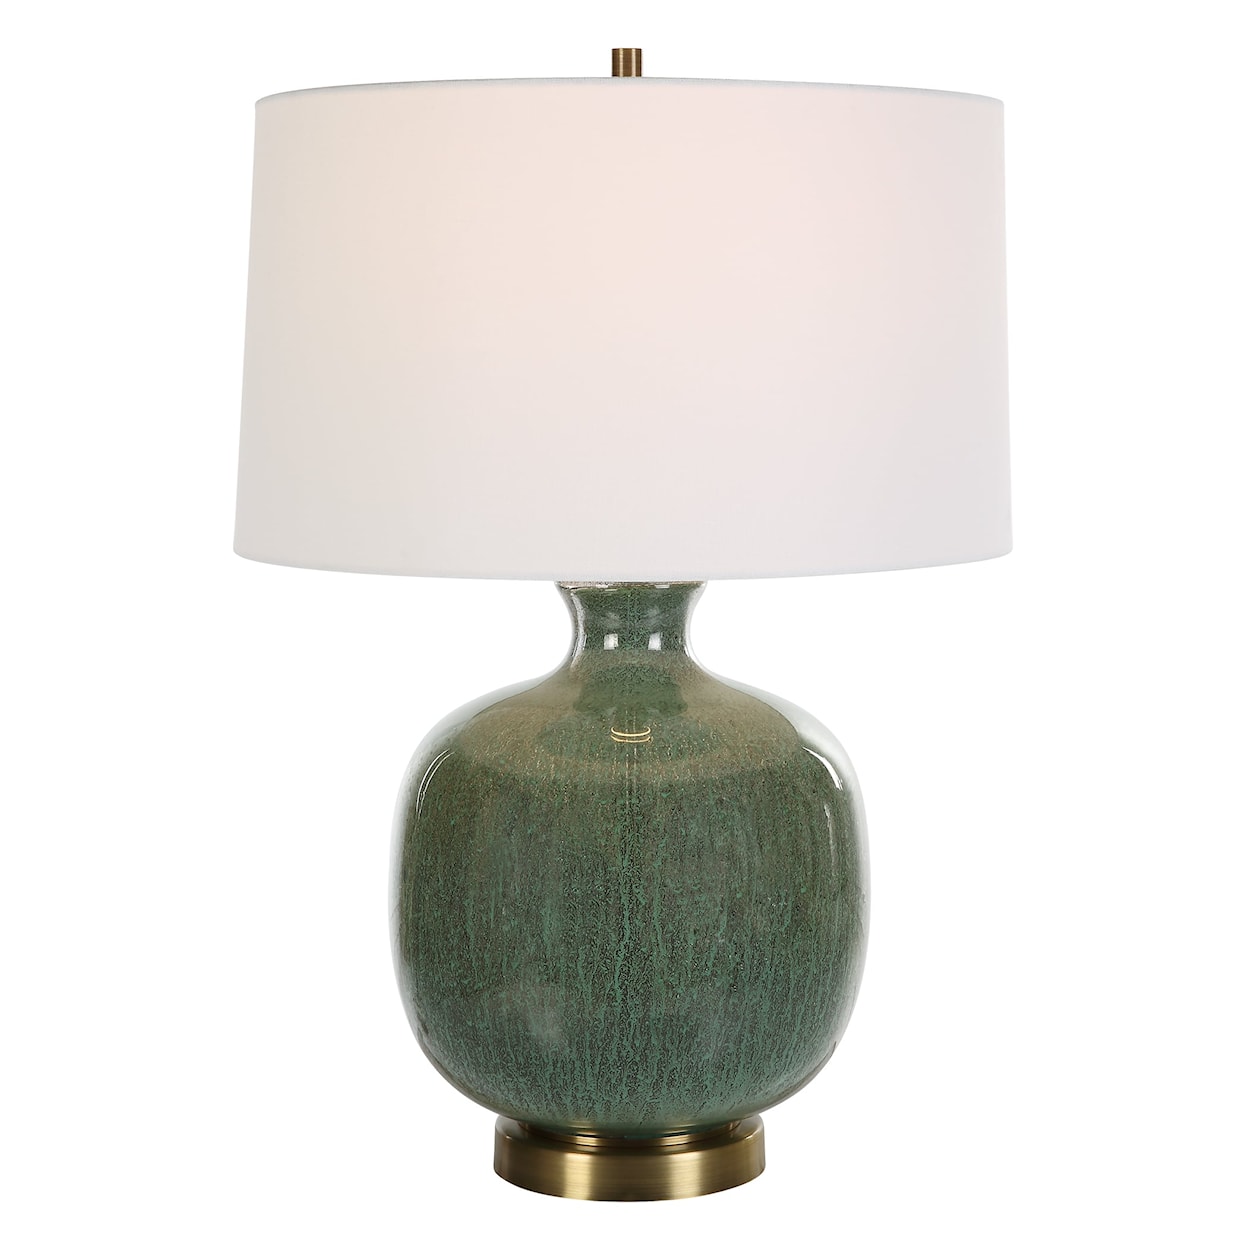 Uttermost Nataly Nataly Aged Green Table Lamp